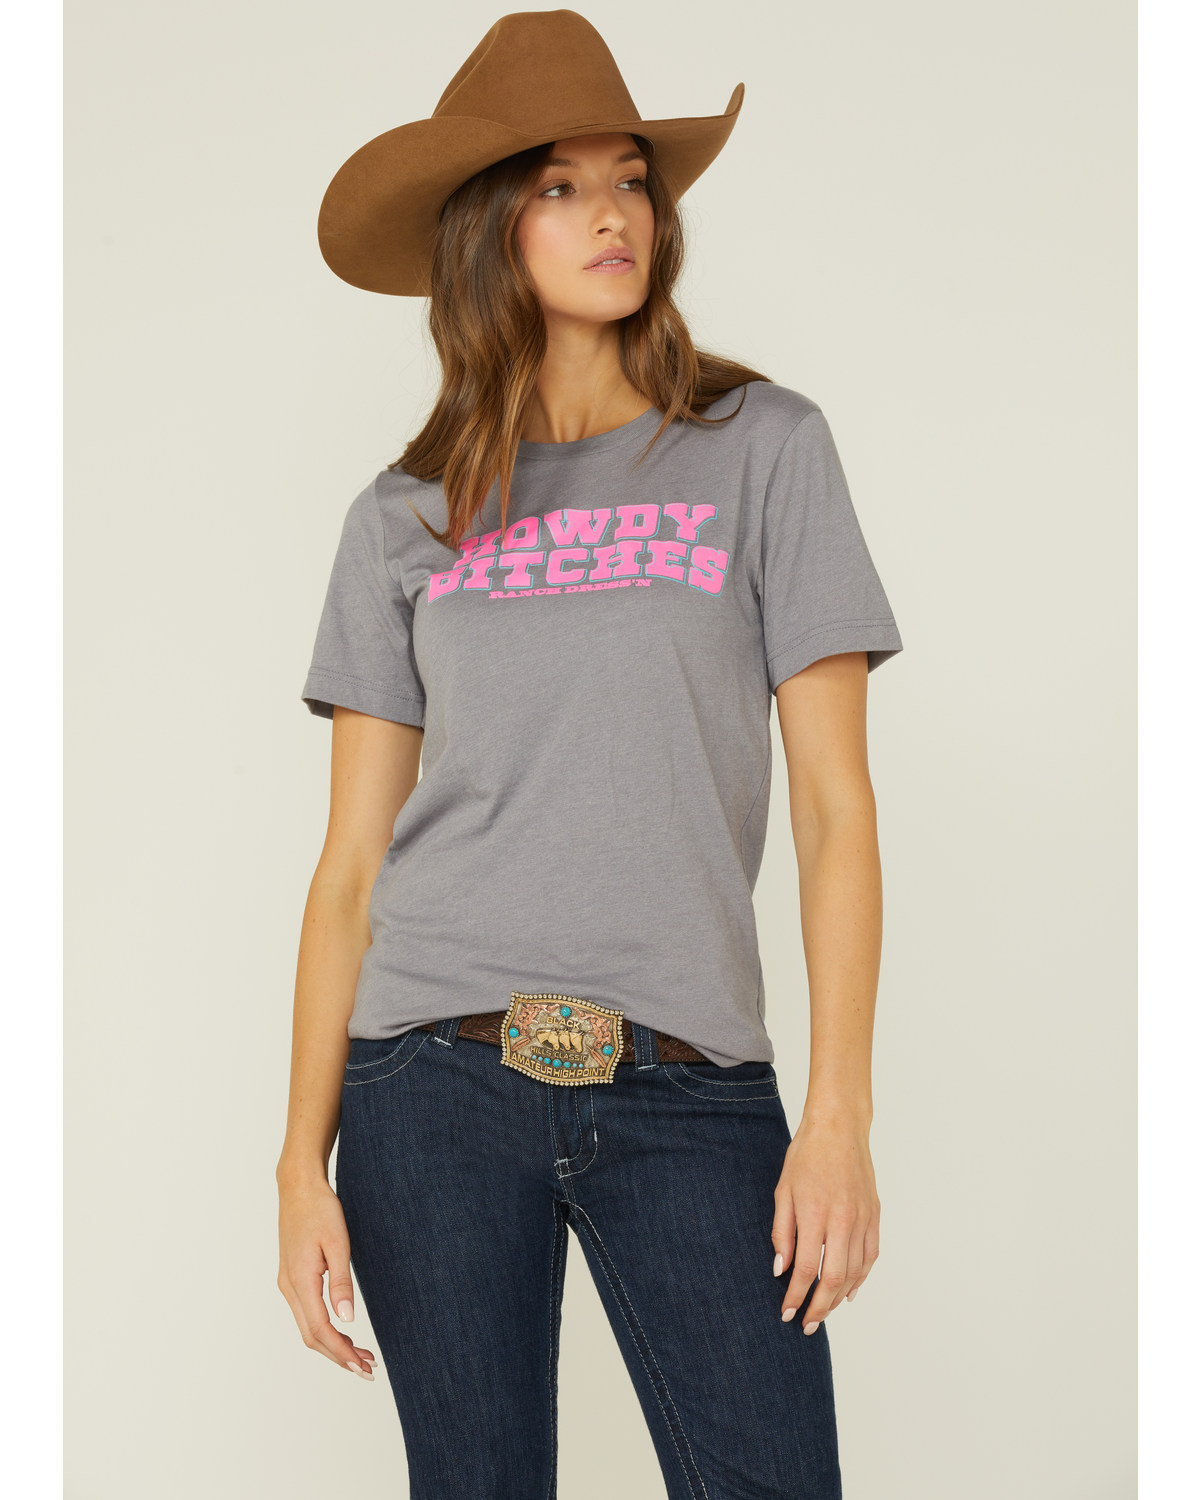 Ranch Dress'n Howdy Bitches Graphic Tee